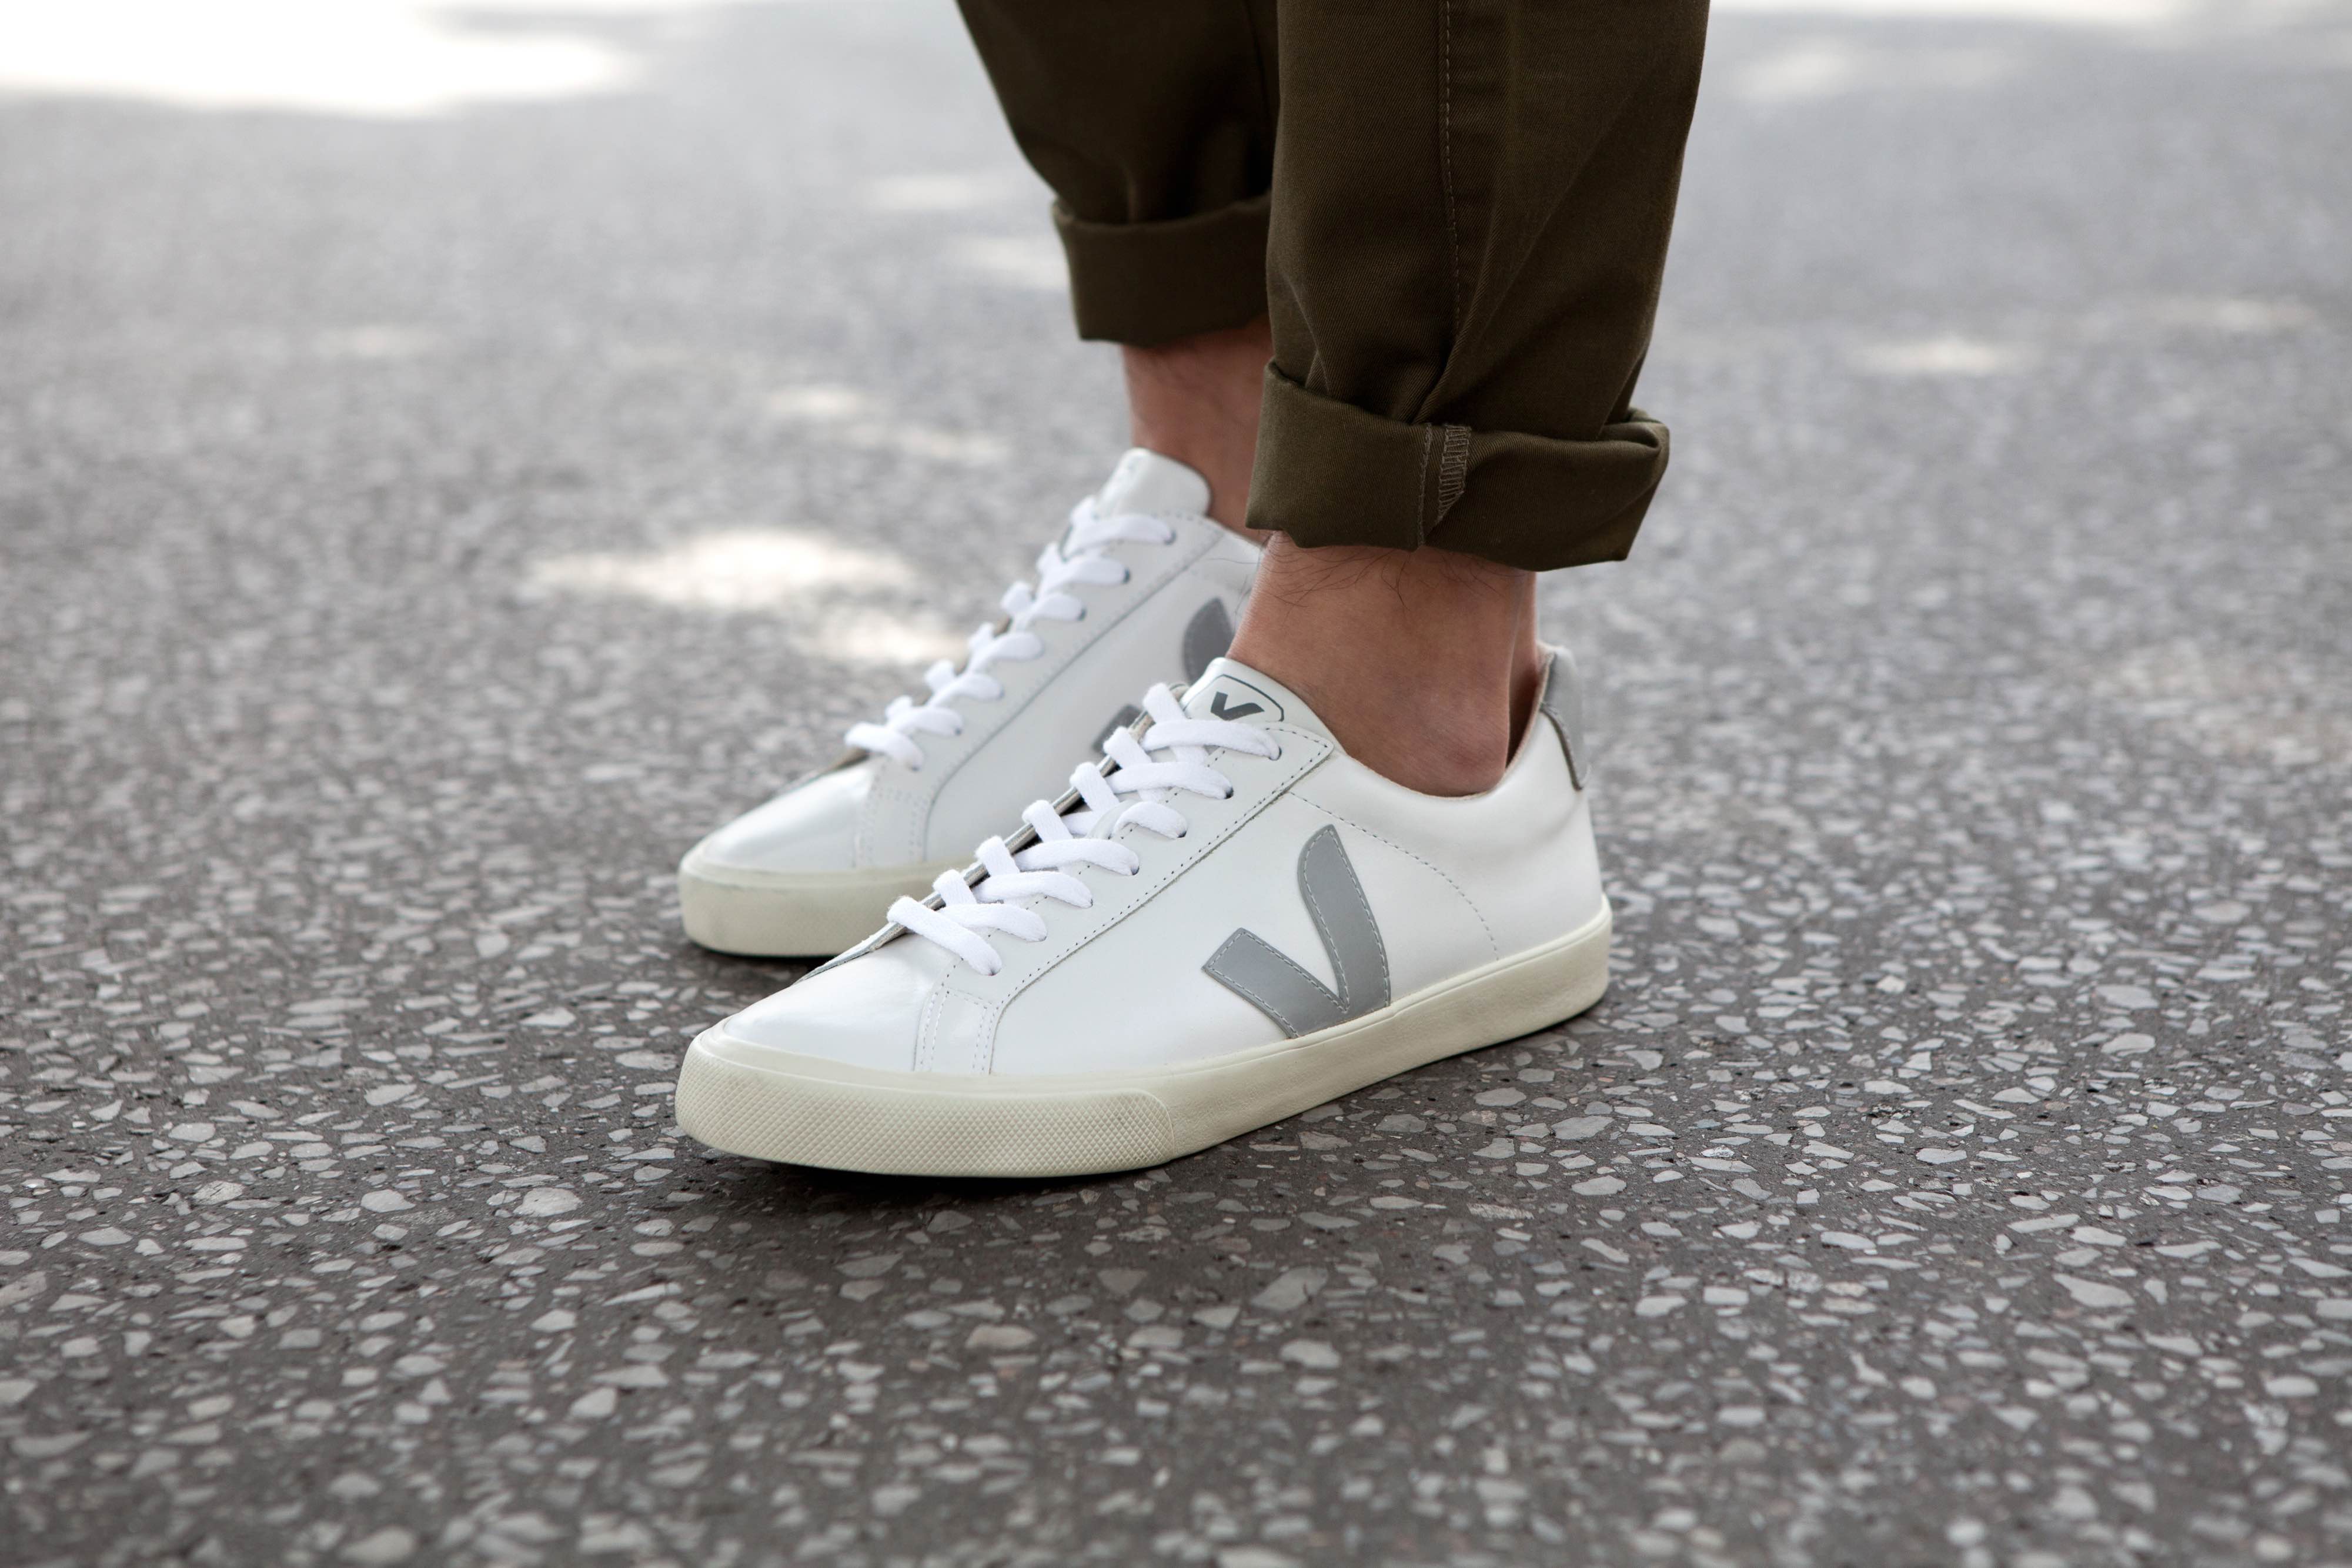 Sucio incondicional Metro VEJA on Twitter: "Monday Essential || Our Esplar Leather White Oxford Grey  are available on https://t.co/y2kb0S5eLB #veja #vejashoes #vejaesplar  https://t.co/w01LRKDsLV" / Twitter